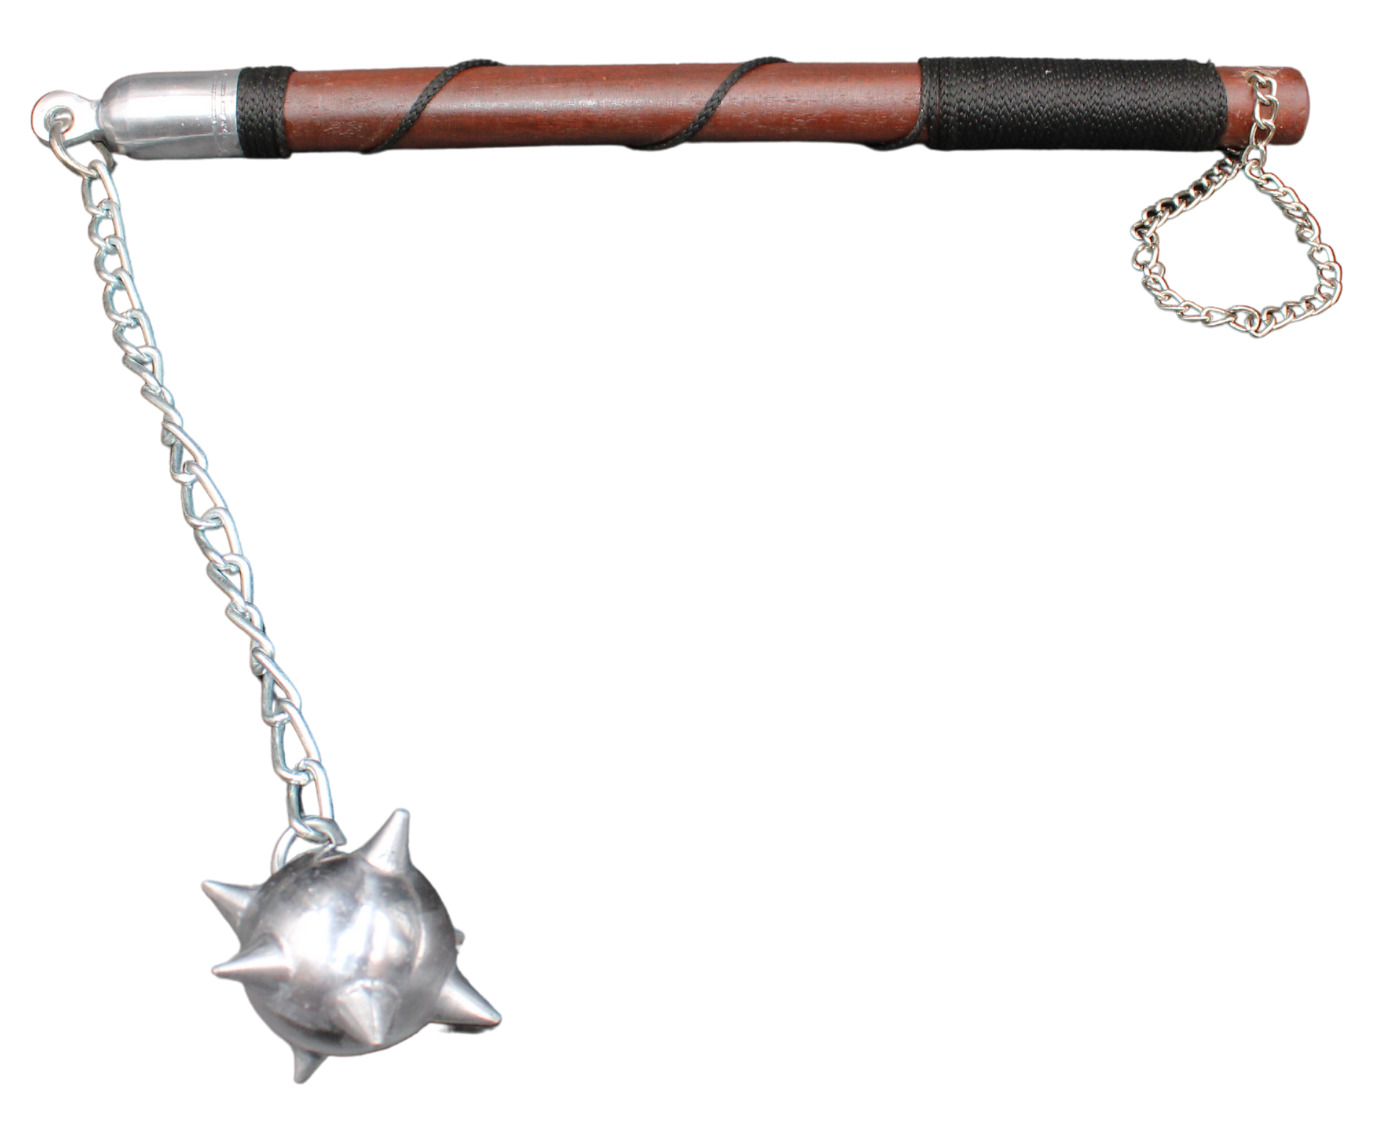 Medieval Gladiator Spiked Solid Metal Single Mace Ball Flail Morningstar Weapon